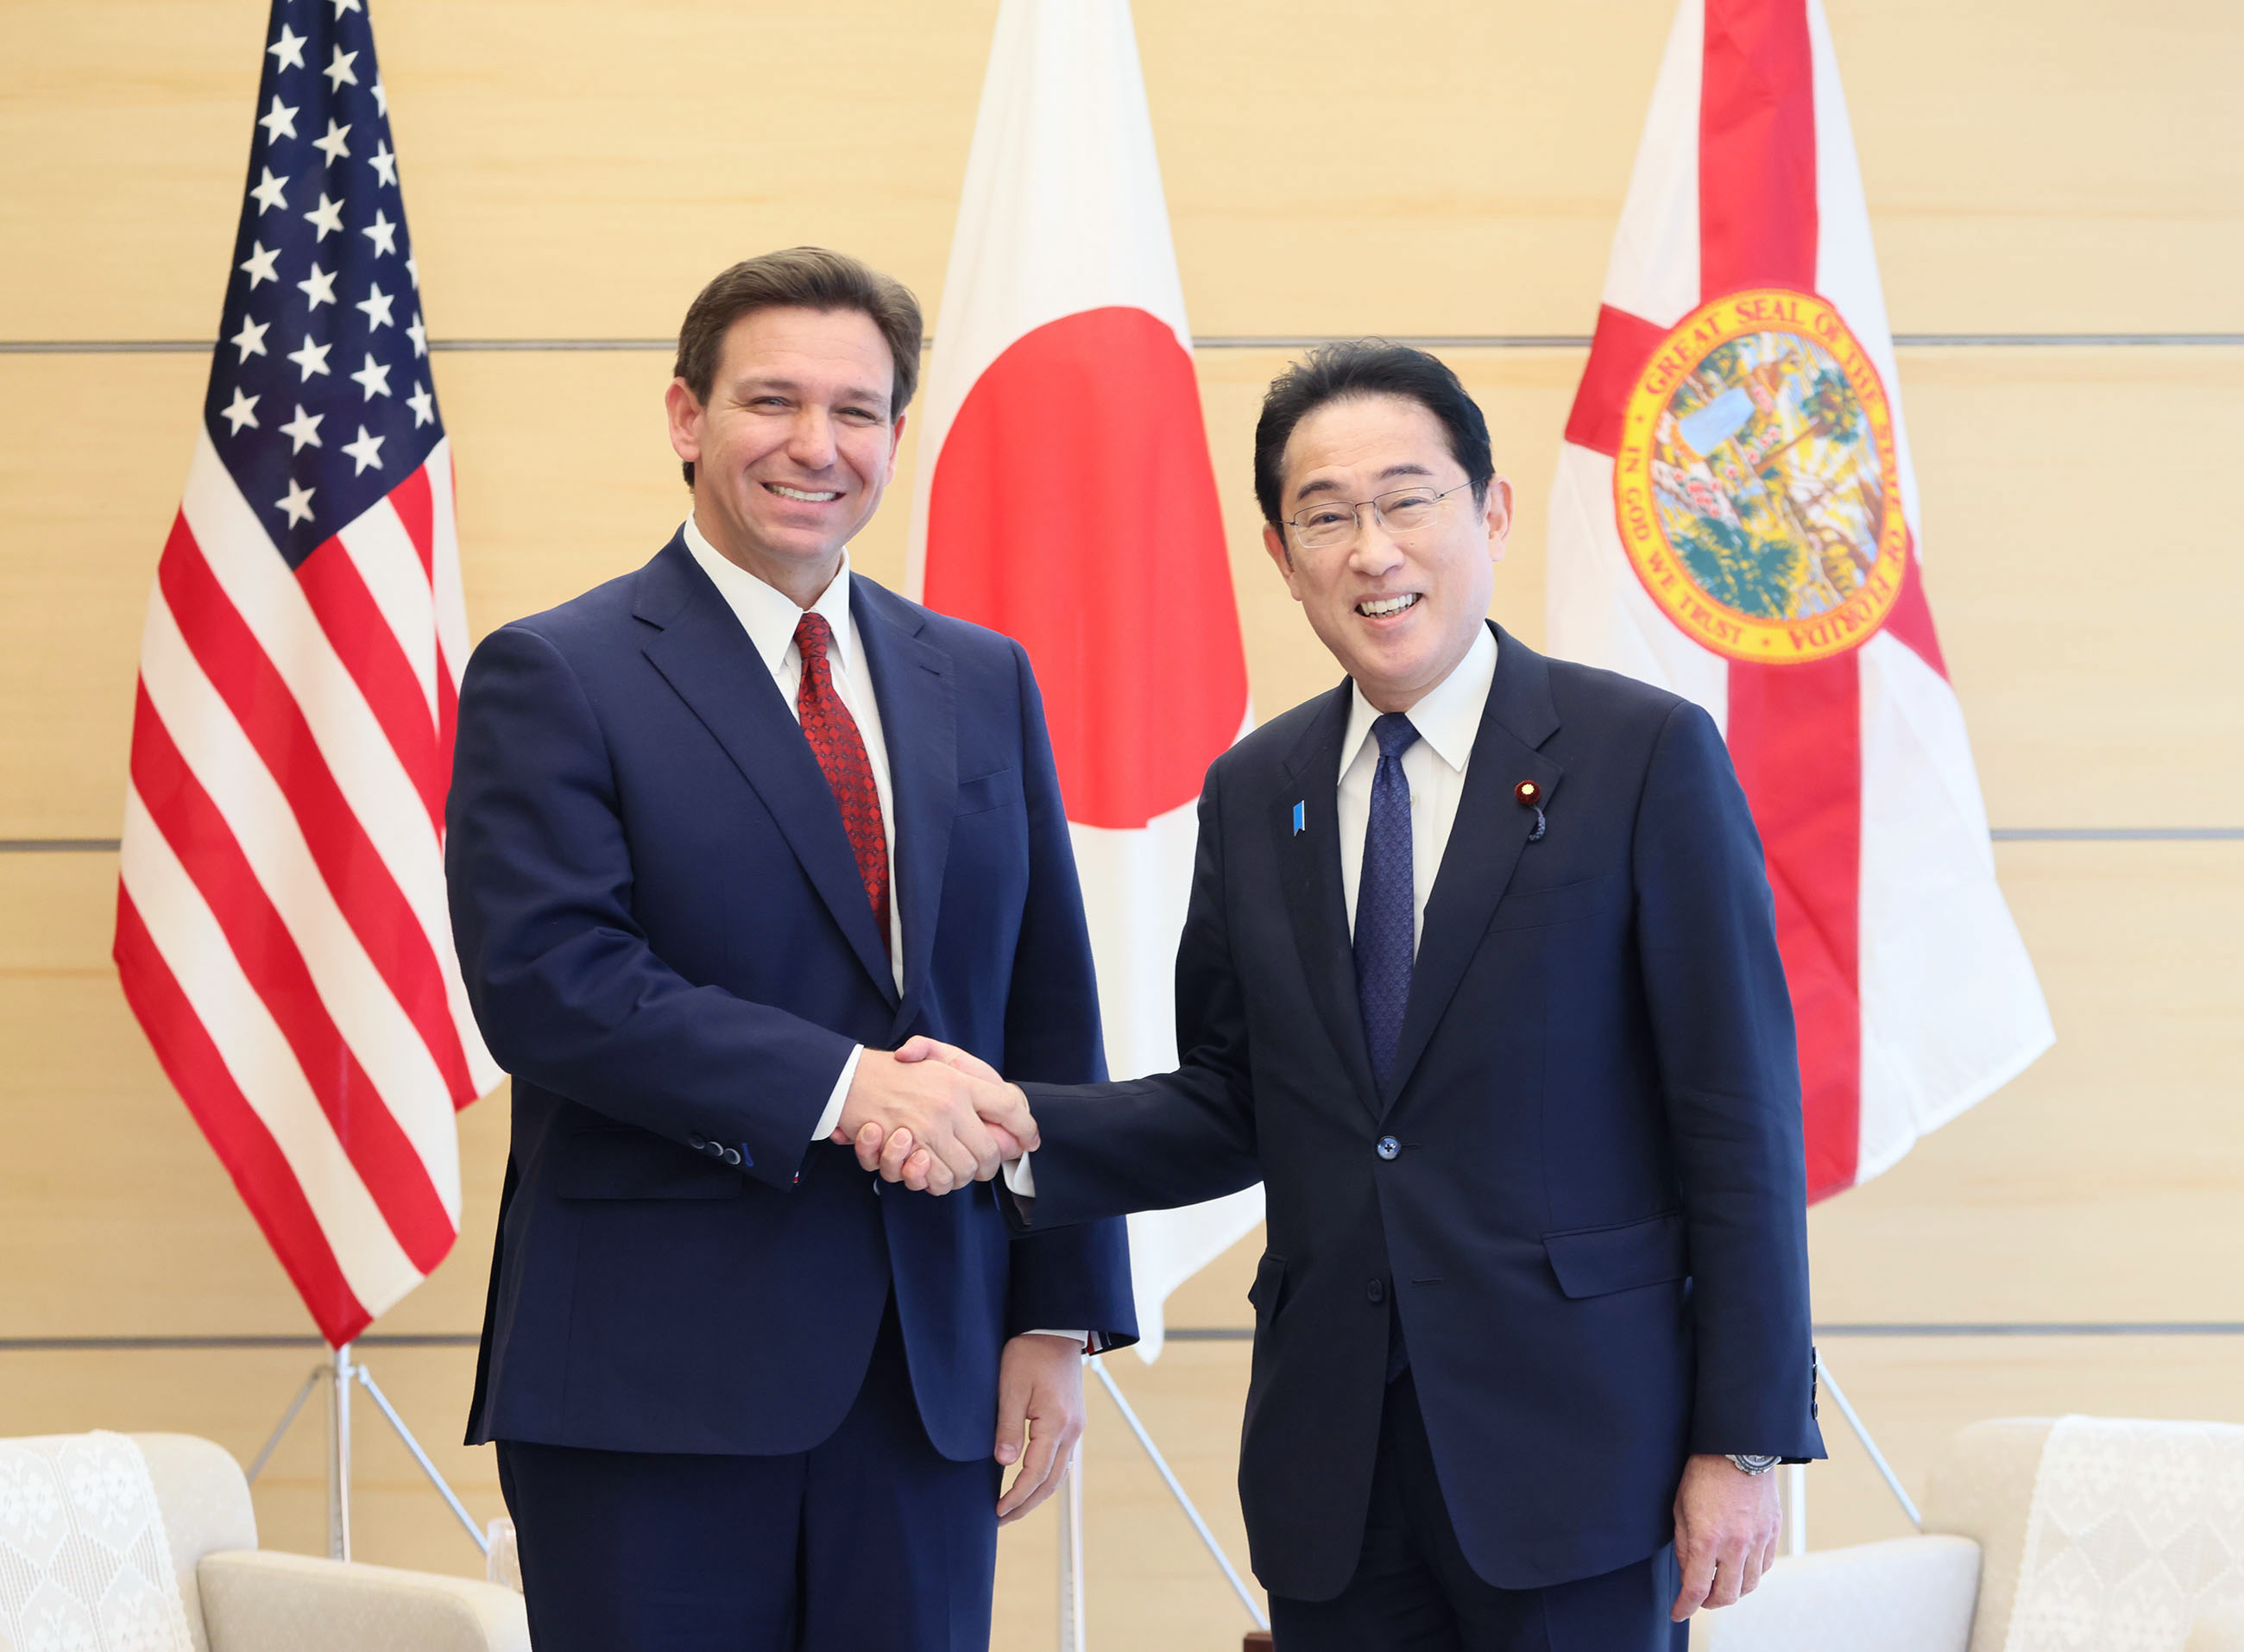 Courtesy Call from Governor DeSantis of the State of Florida